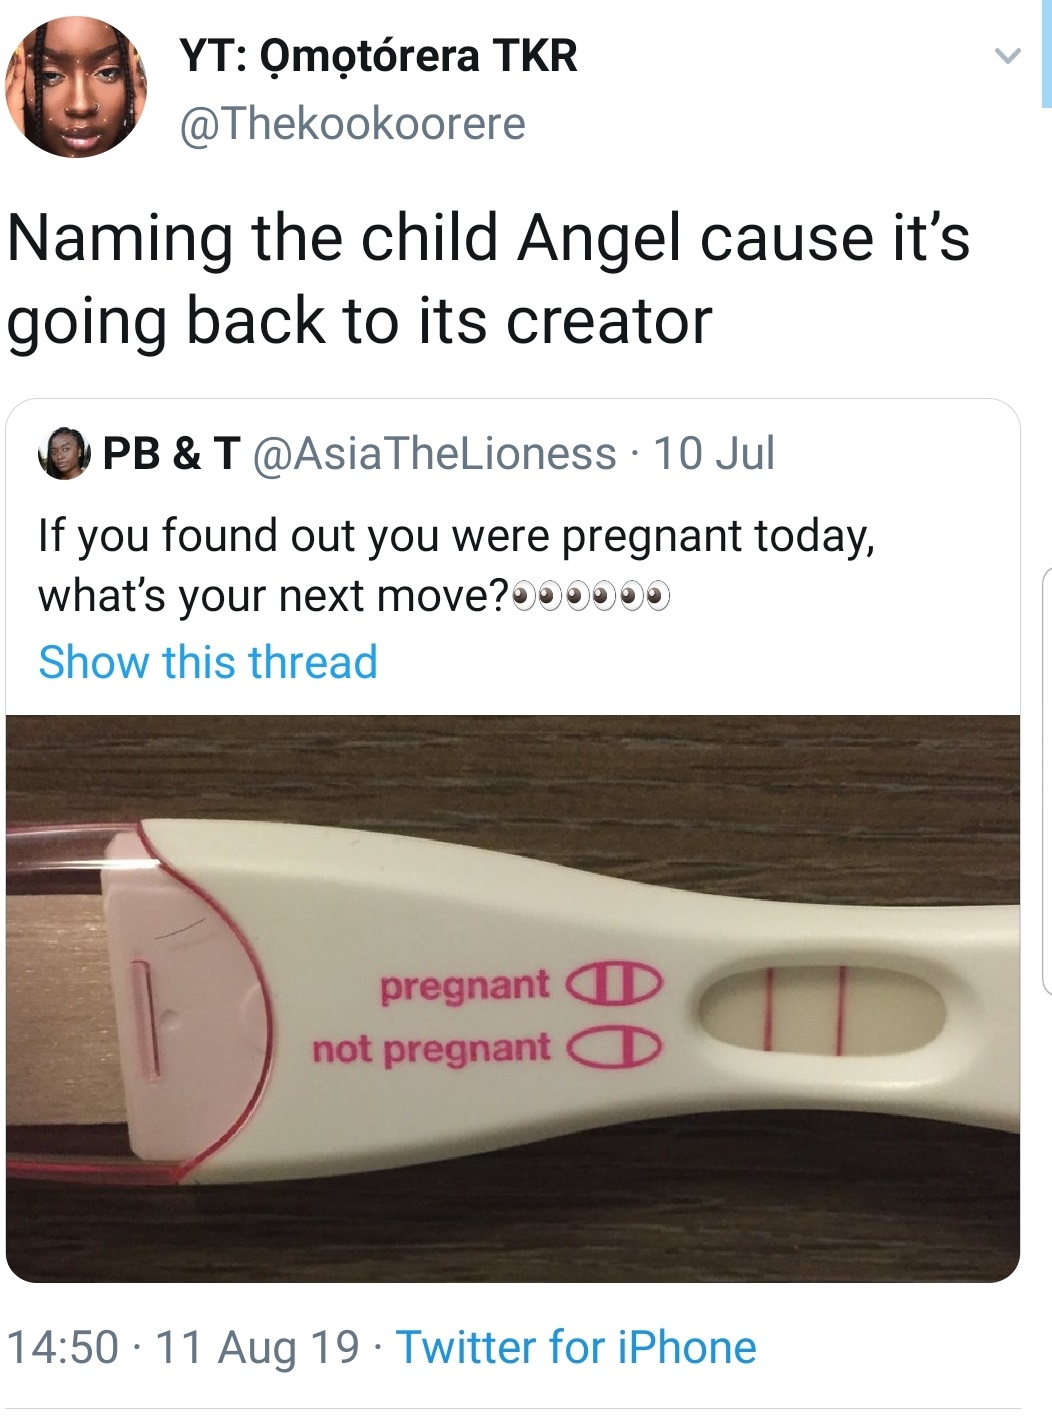 Naming the child Angel cause it's going back to its creator Pb & T 10 Jul If you found out you were pregnant today, what's your next move? Show this thread pregnant not pregnant a 11 Aug 19. Twitter for iPhone